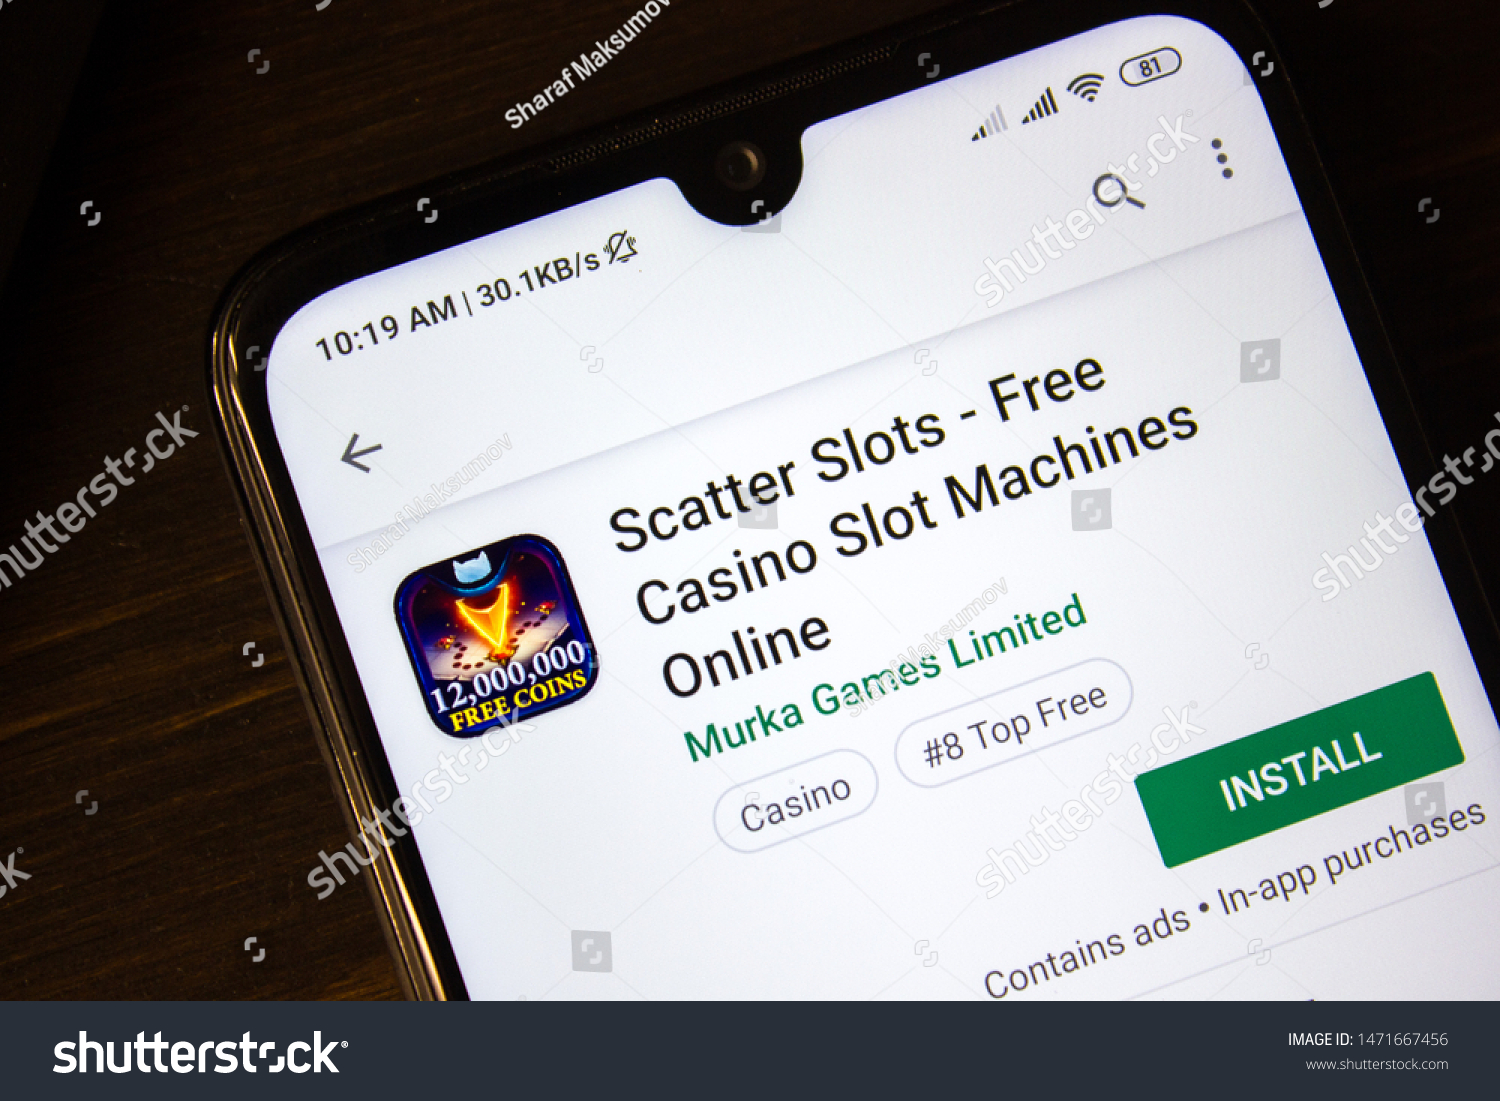 Murka Scatter Slots Free Coins